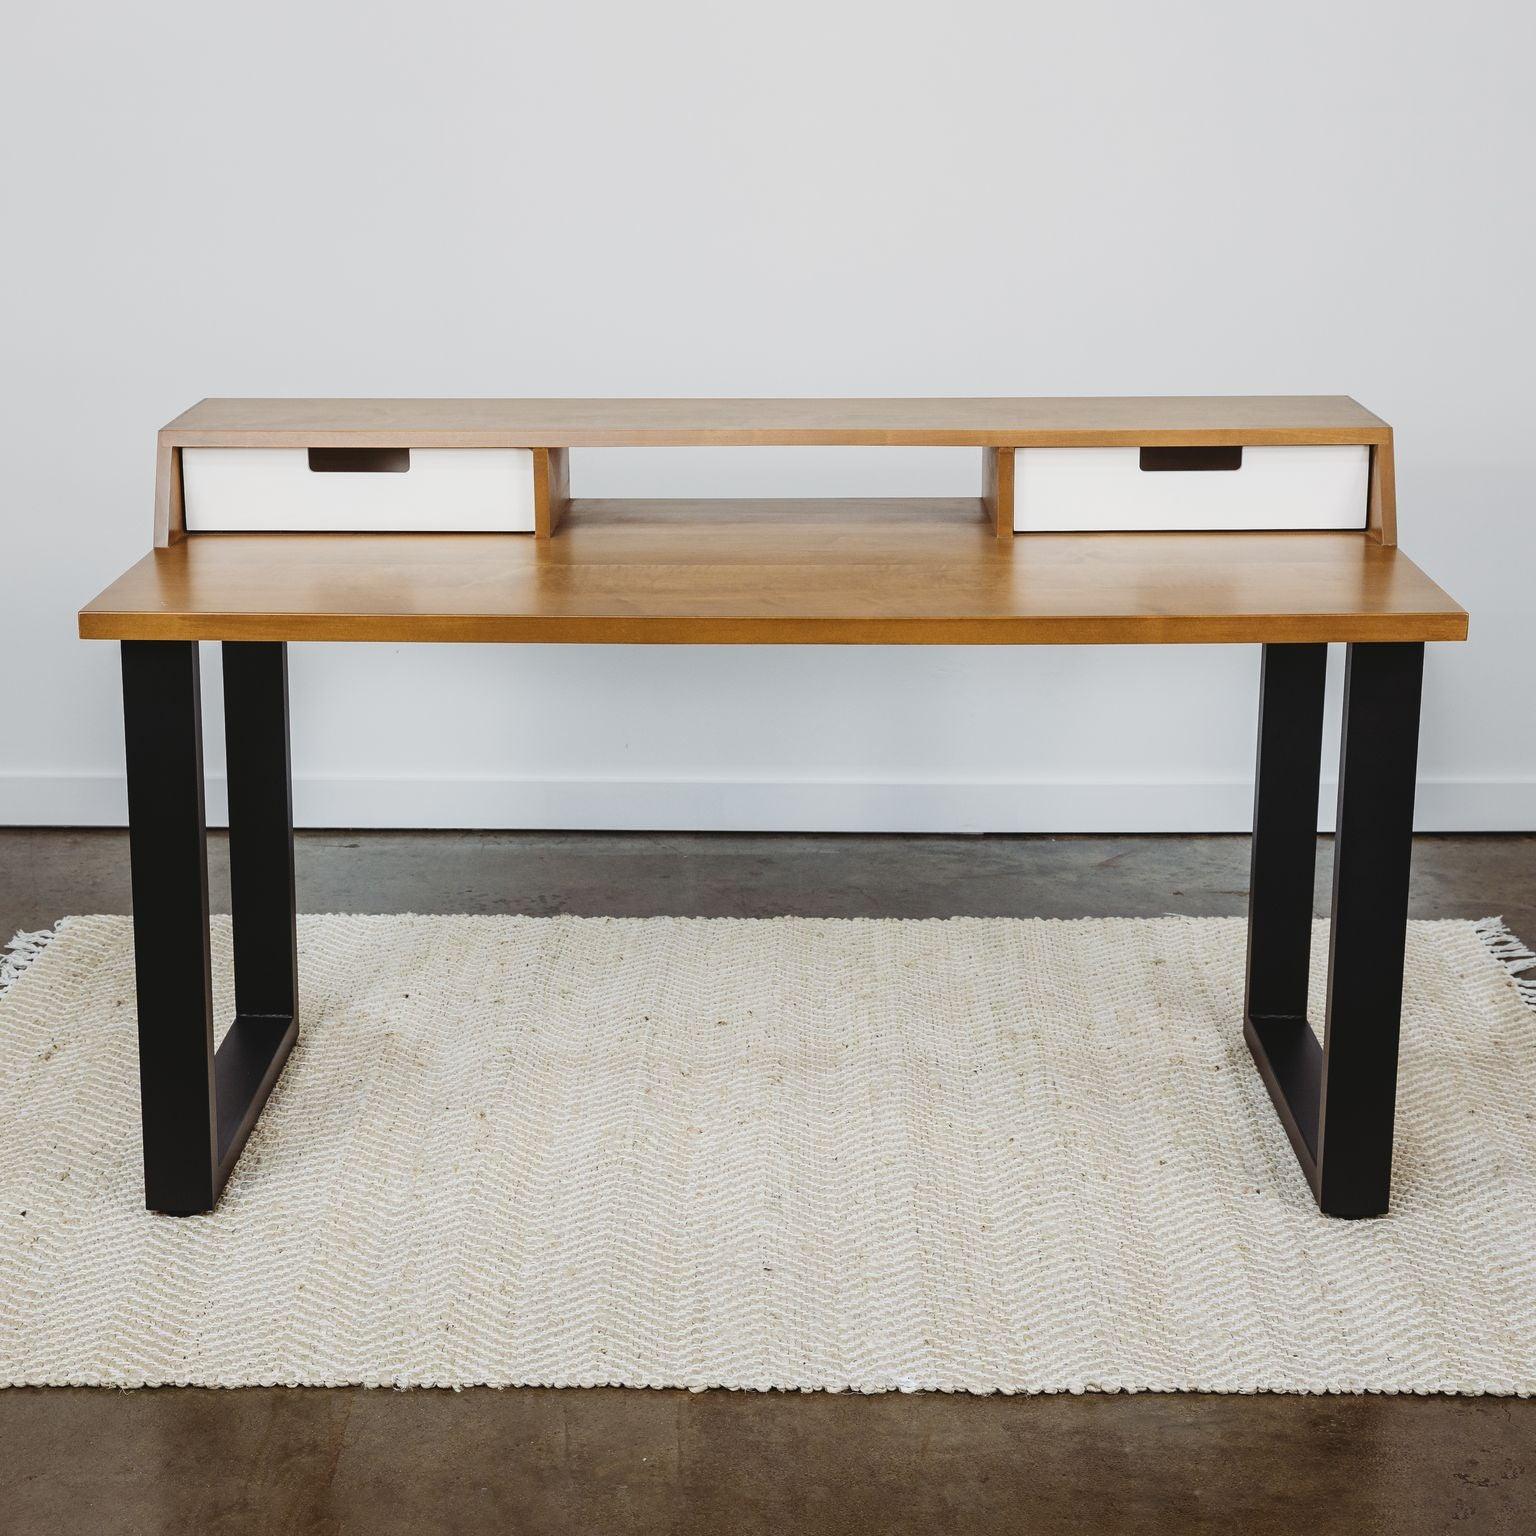 SALE // ALBRIGHT DESK - 60 - BLONDE STAINED MAPLE - WHITE PAINT ACCENTS - ROMI DESIGN